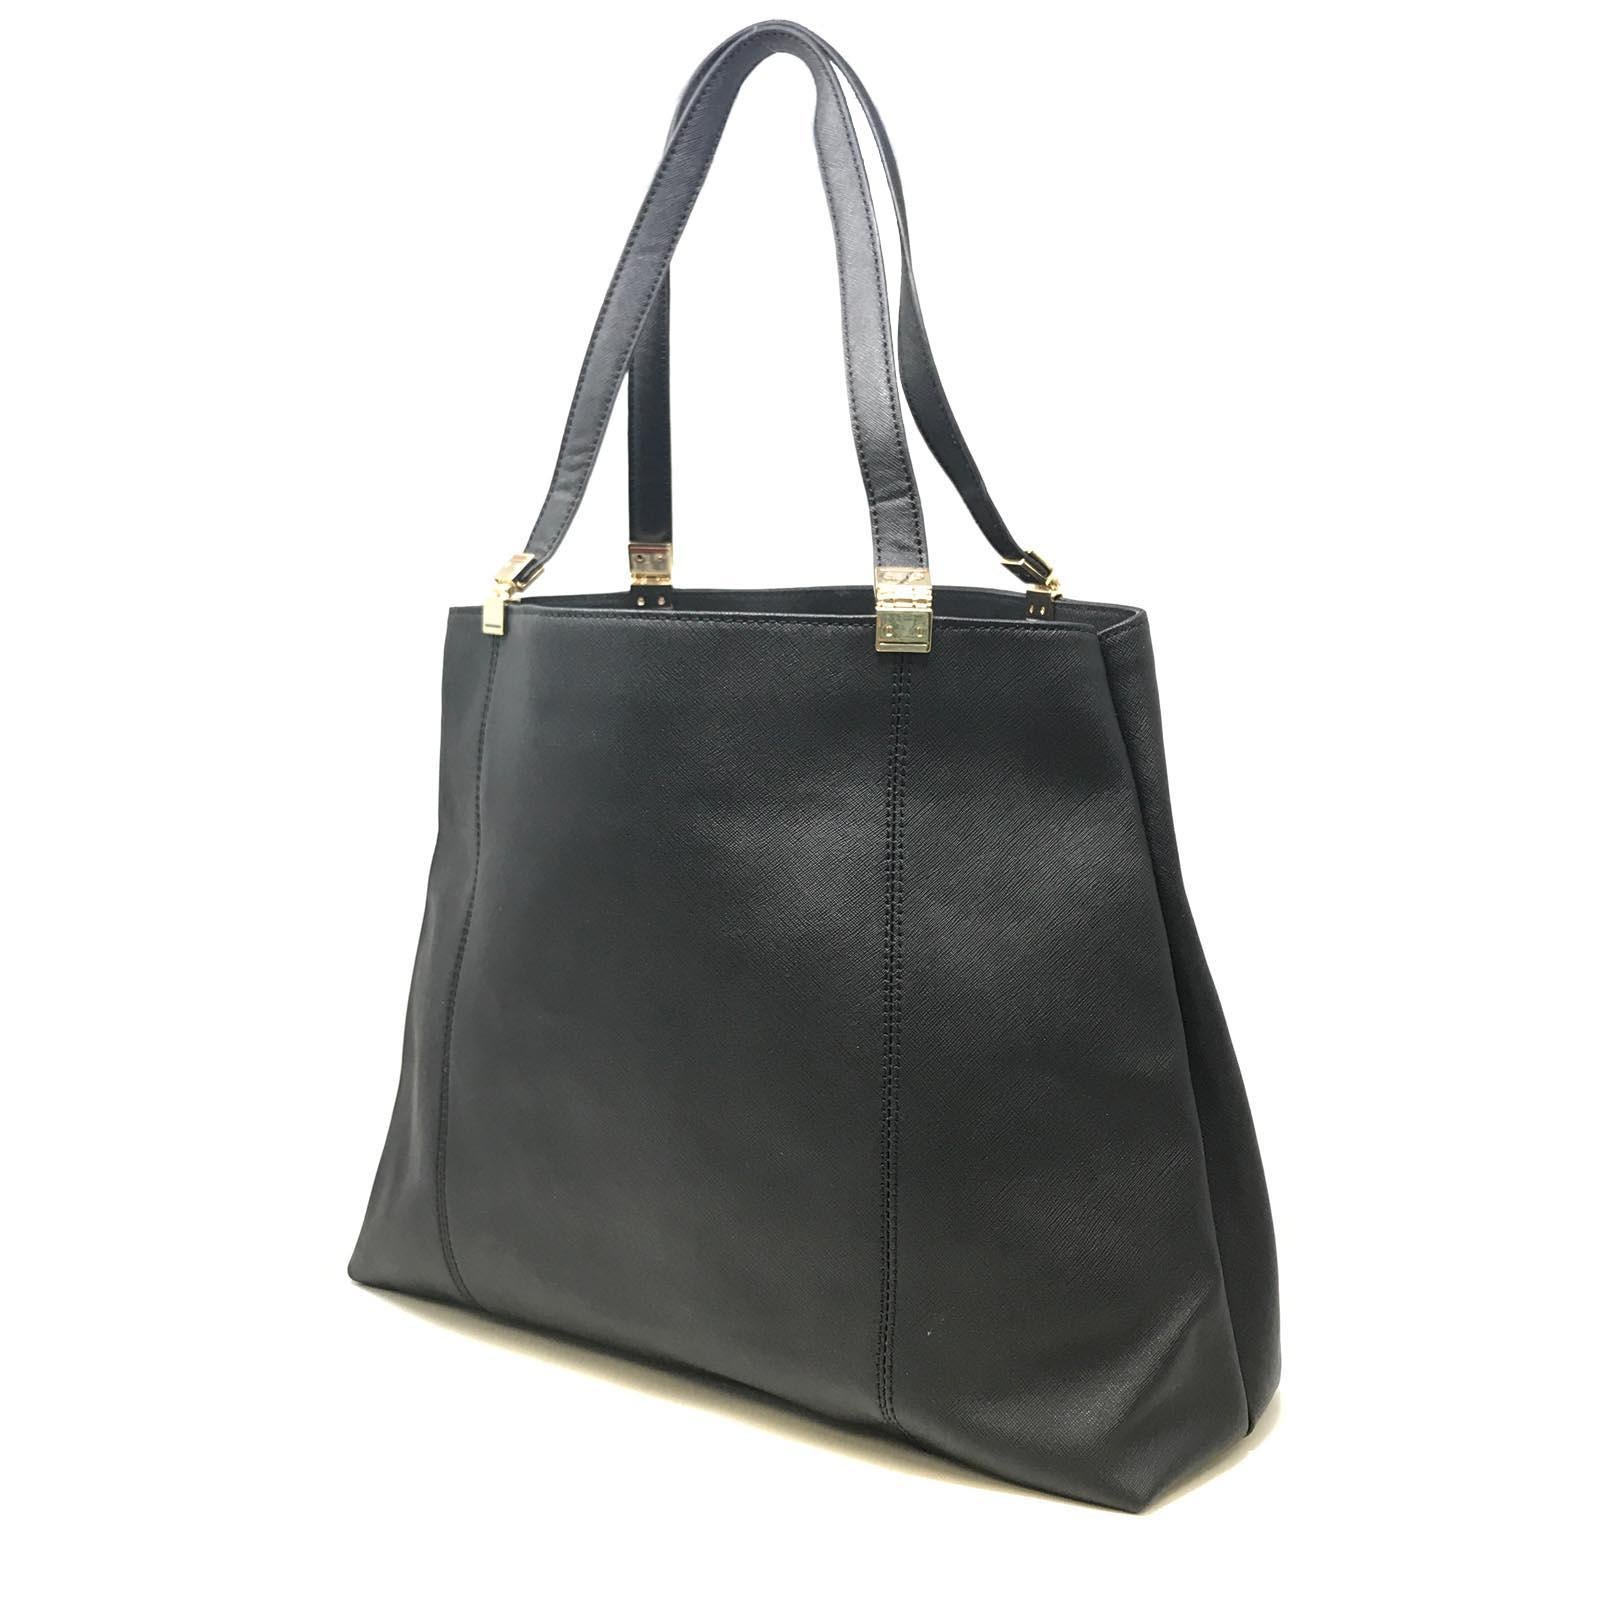 Pre Owned Tommy Hilfiger Black Large Shoulder Women's Bag is in prefect condition  except one minor defect one screw from handle is missing. length 18 inch, height 12 inch, depth 6 inch 